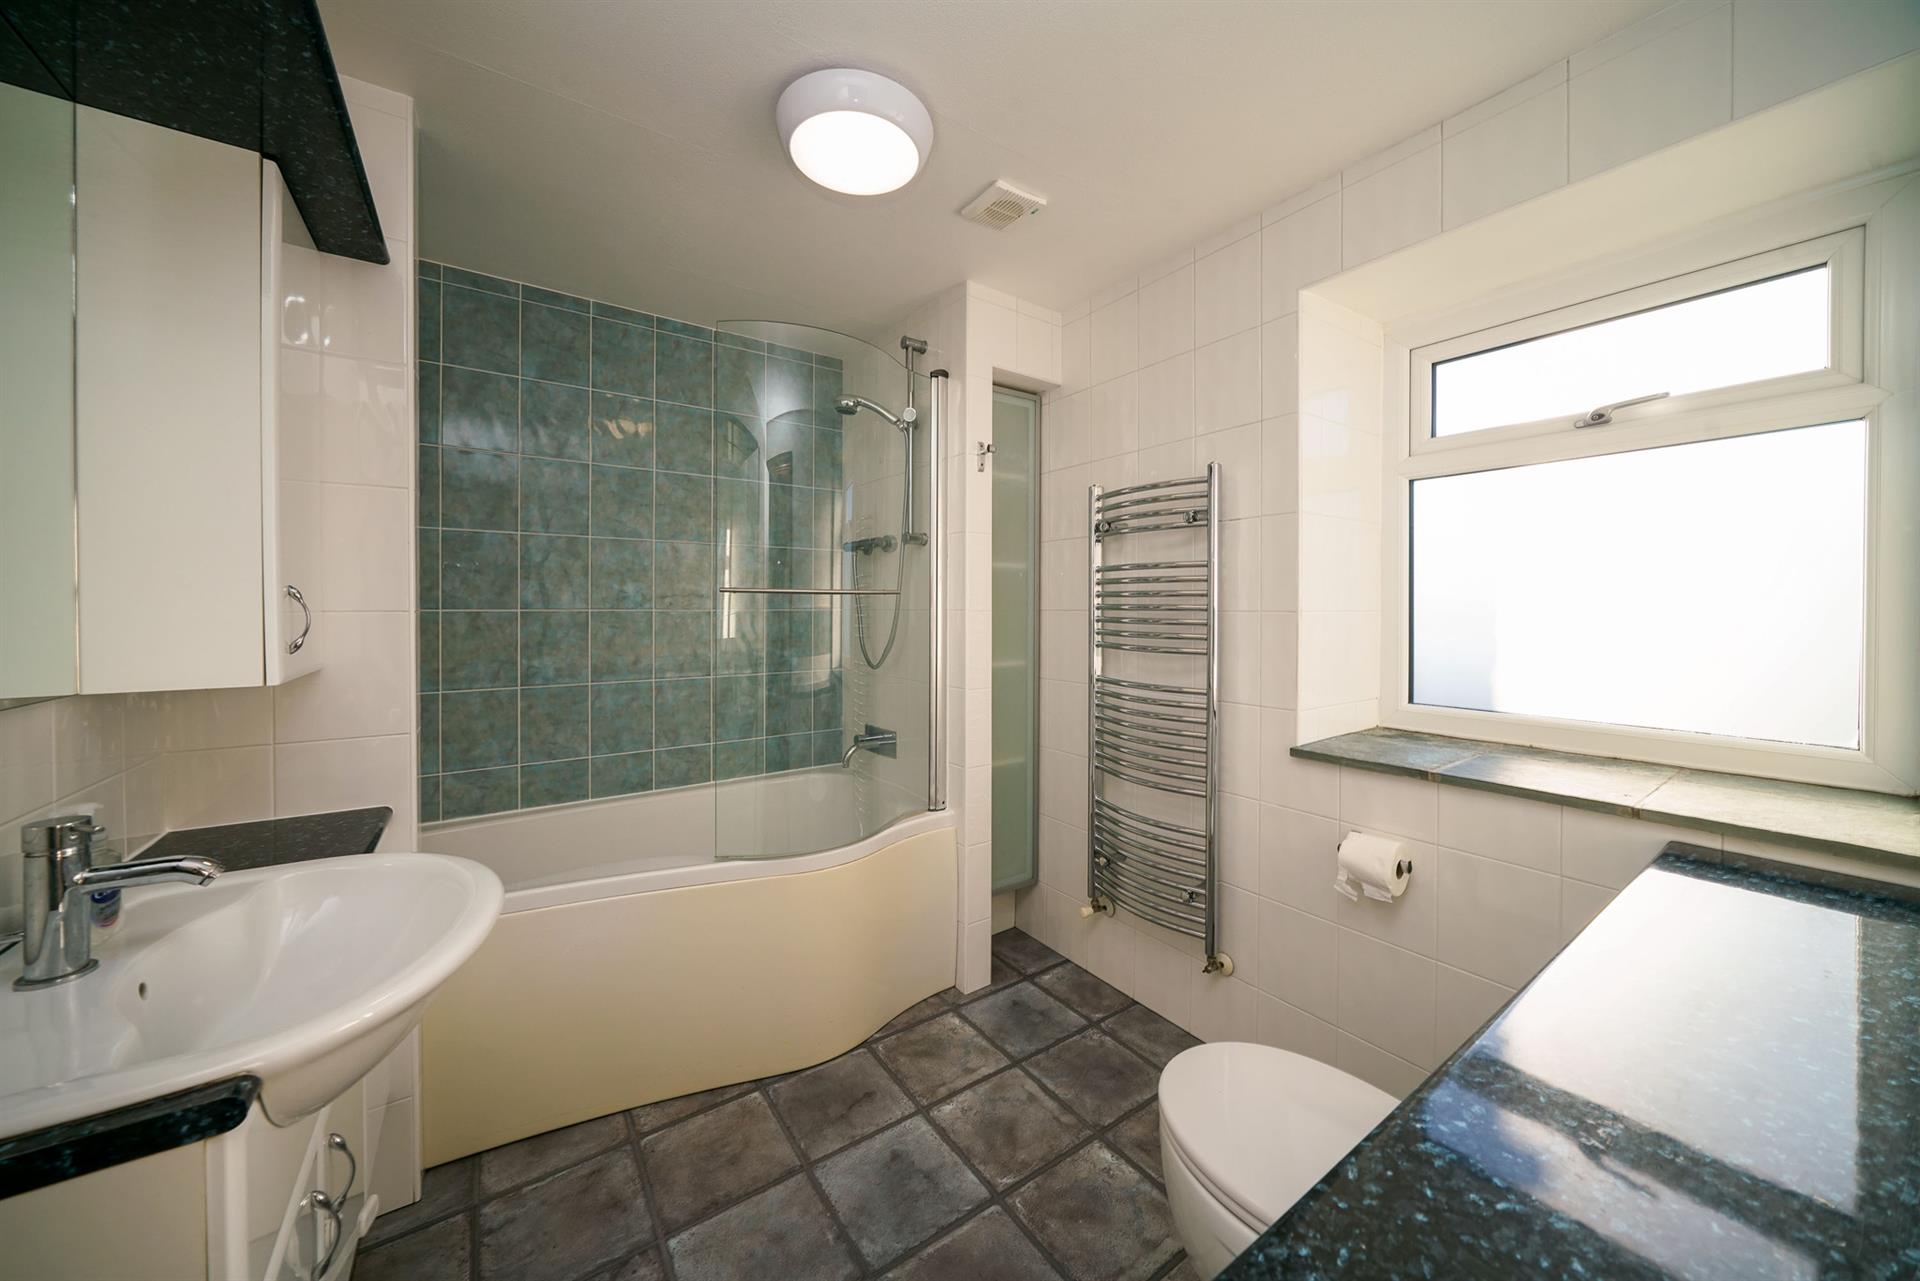 3 bedroom house share house / flat share To Let in Bolton, Greater Manchester - Bathroom.